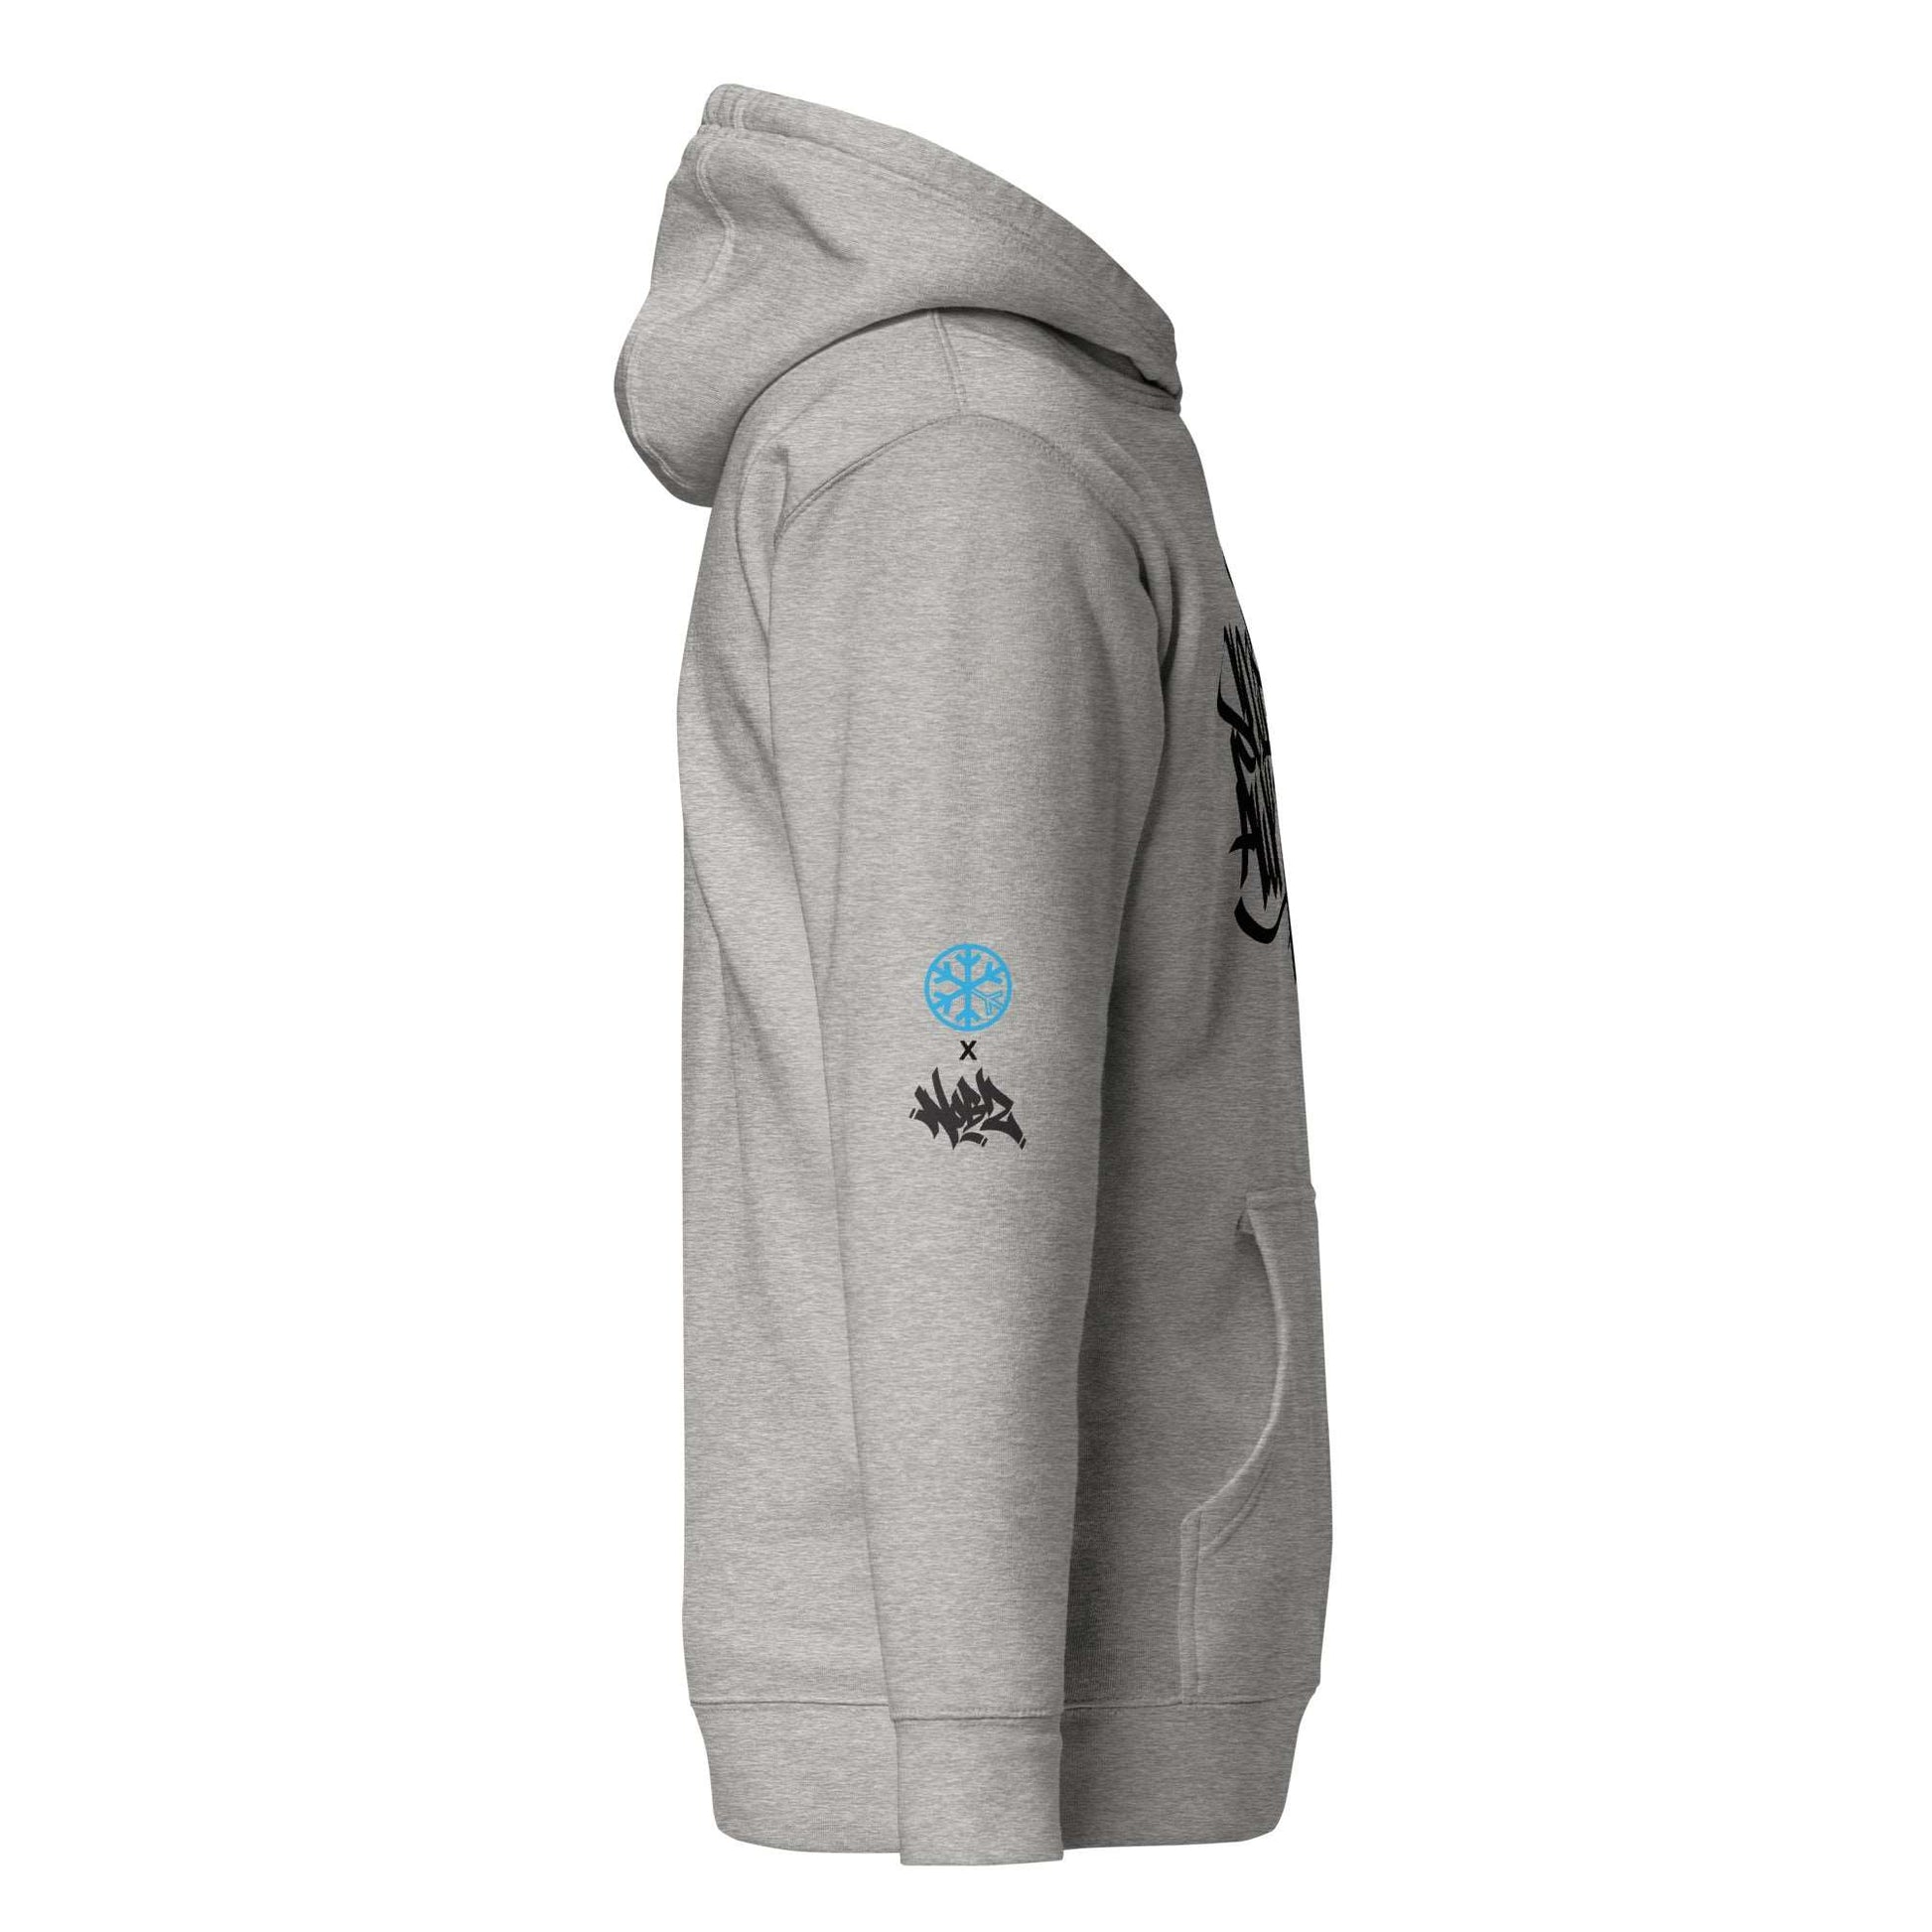 side hoodie Socially Awkward gray by B.Different Clothing independent streetwear brand inspired by street art graffiti